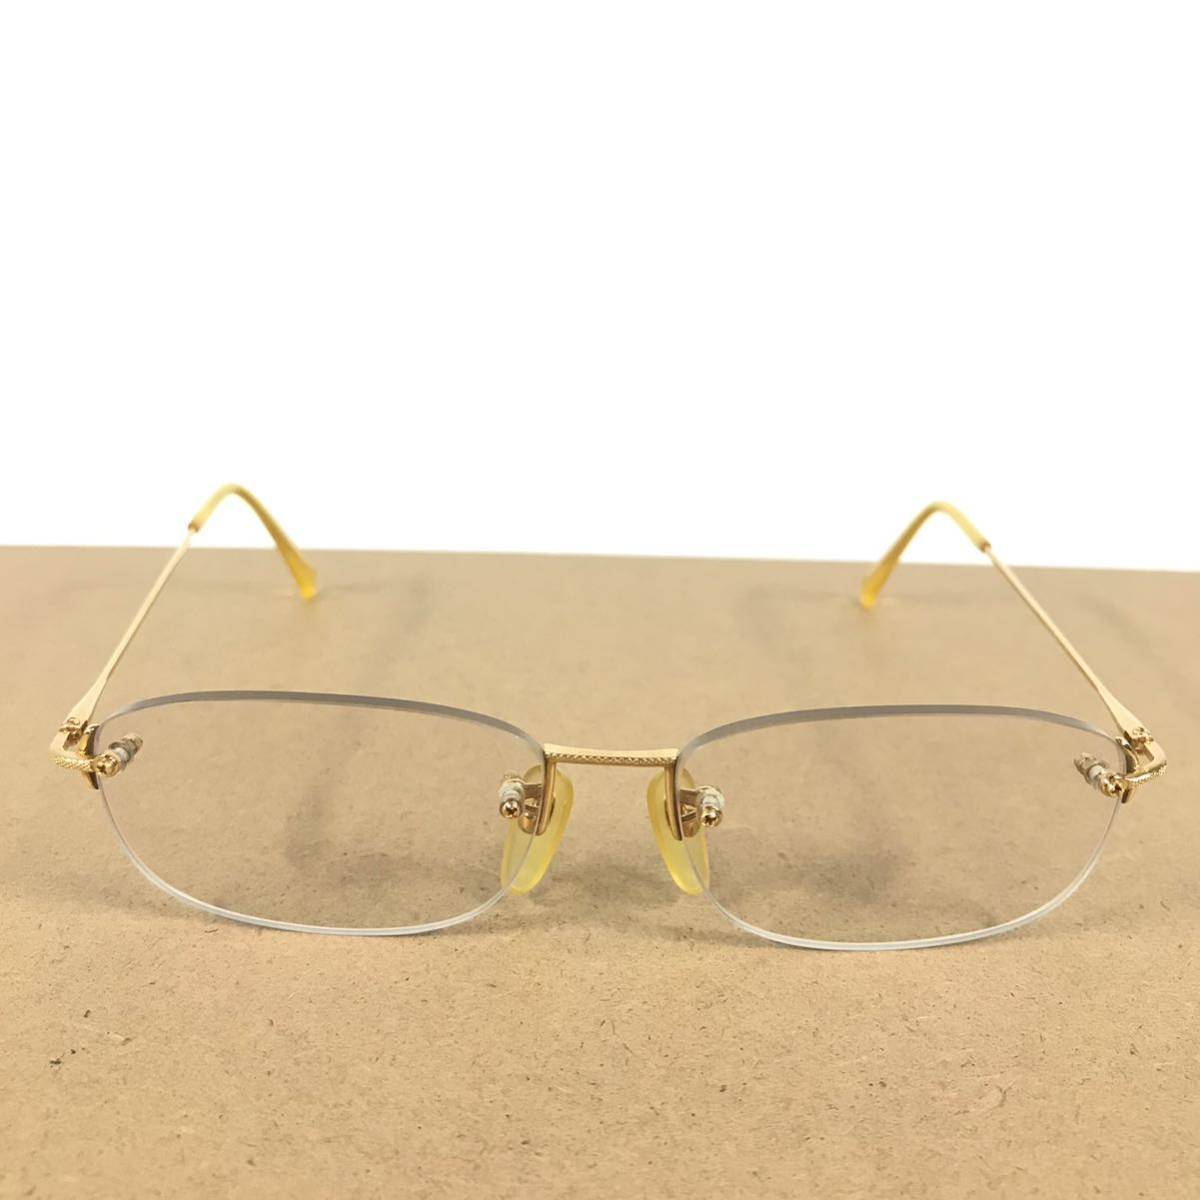 [ Seiko ] genuine article SEIKO AMENITY K18 glasses two-point 18 gold 750 Gold times entering sunglasses glasses glasses weight 23.2g men's lady's 